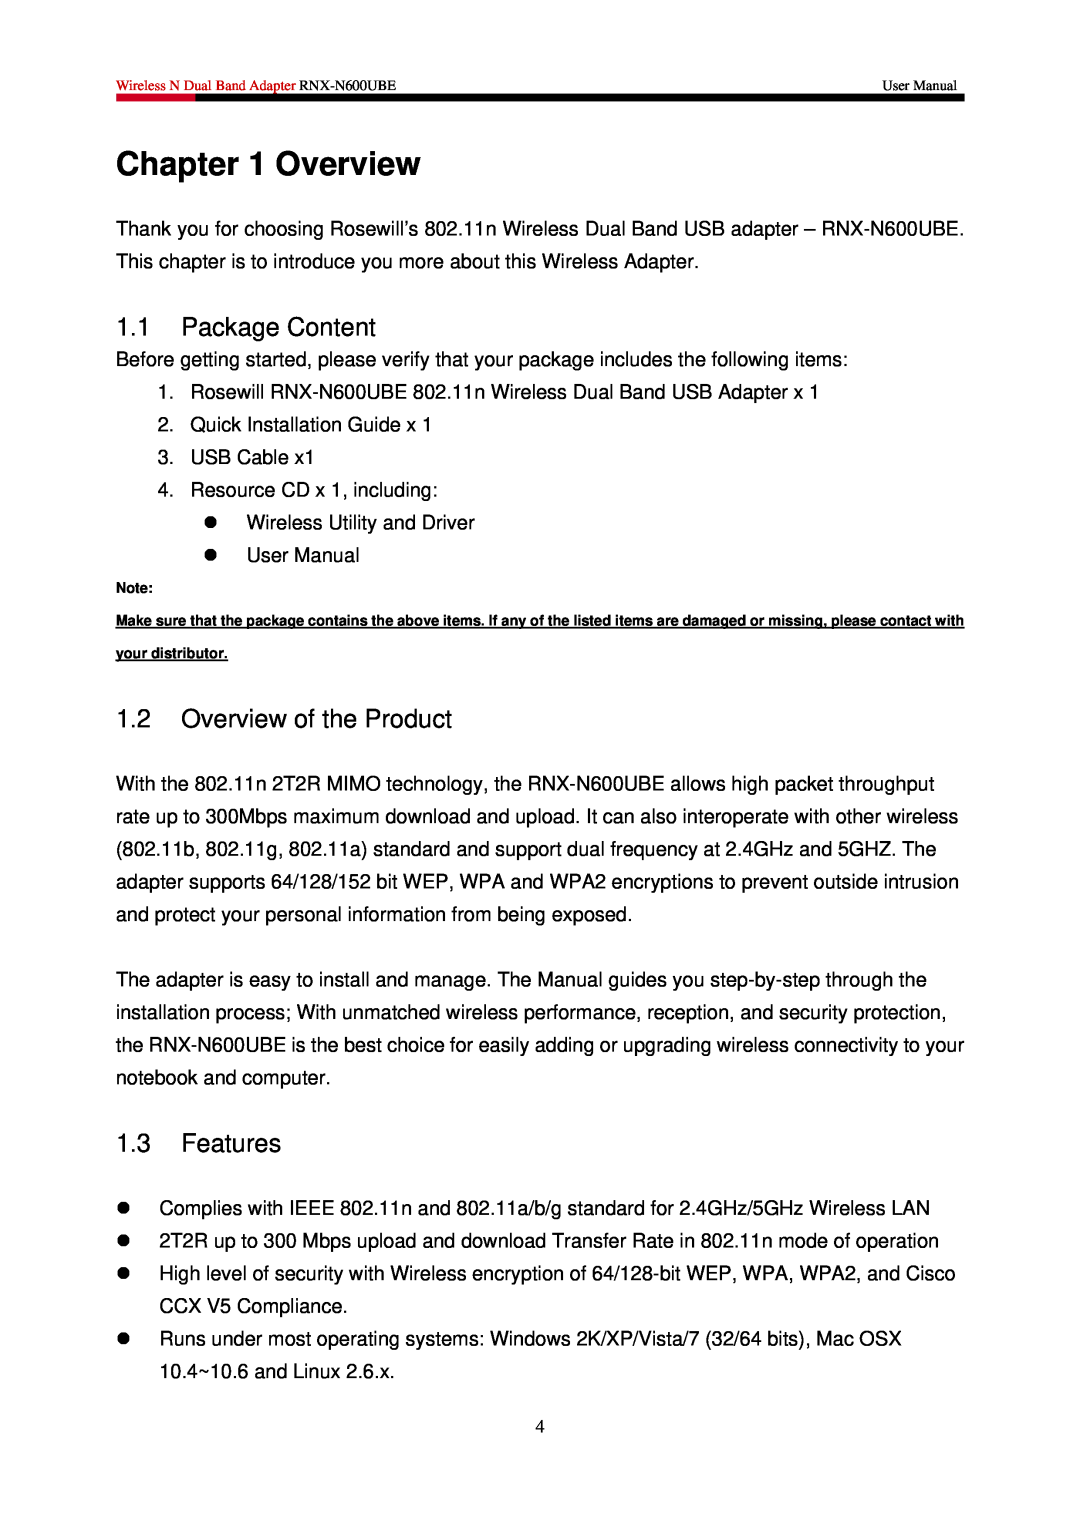 Rosewill RNX-N600UBE user manual Package Content, Overview of the Product, Features 